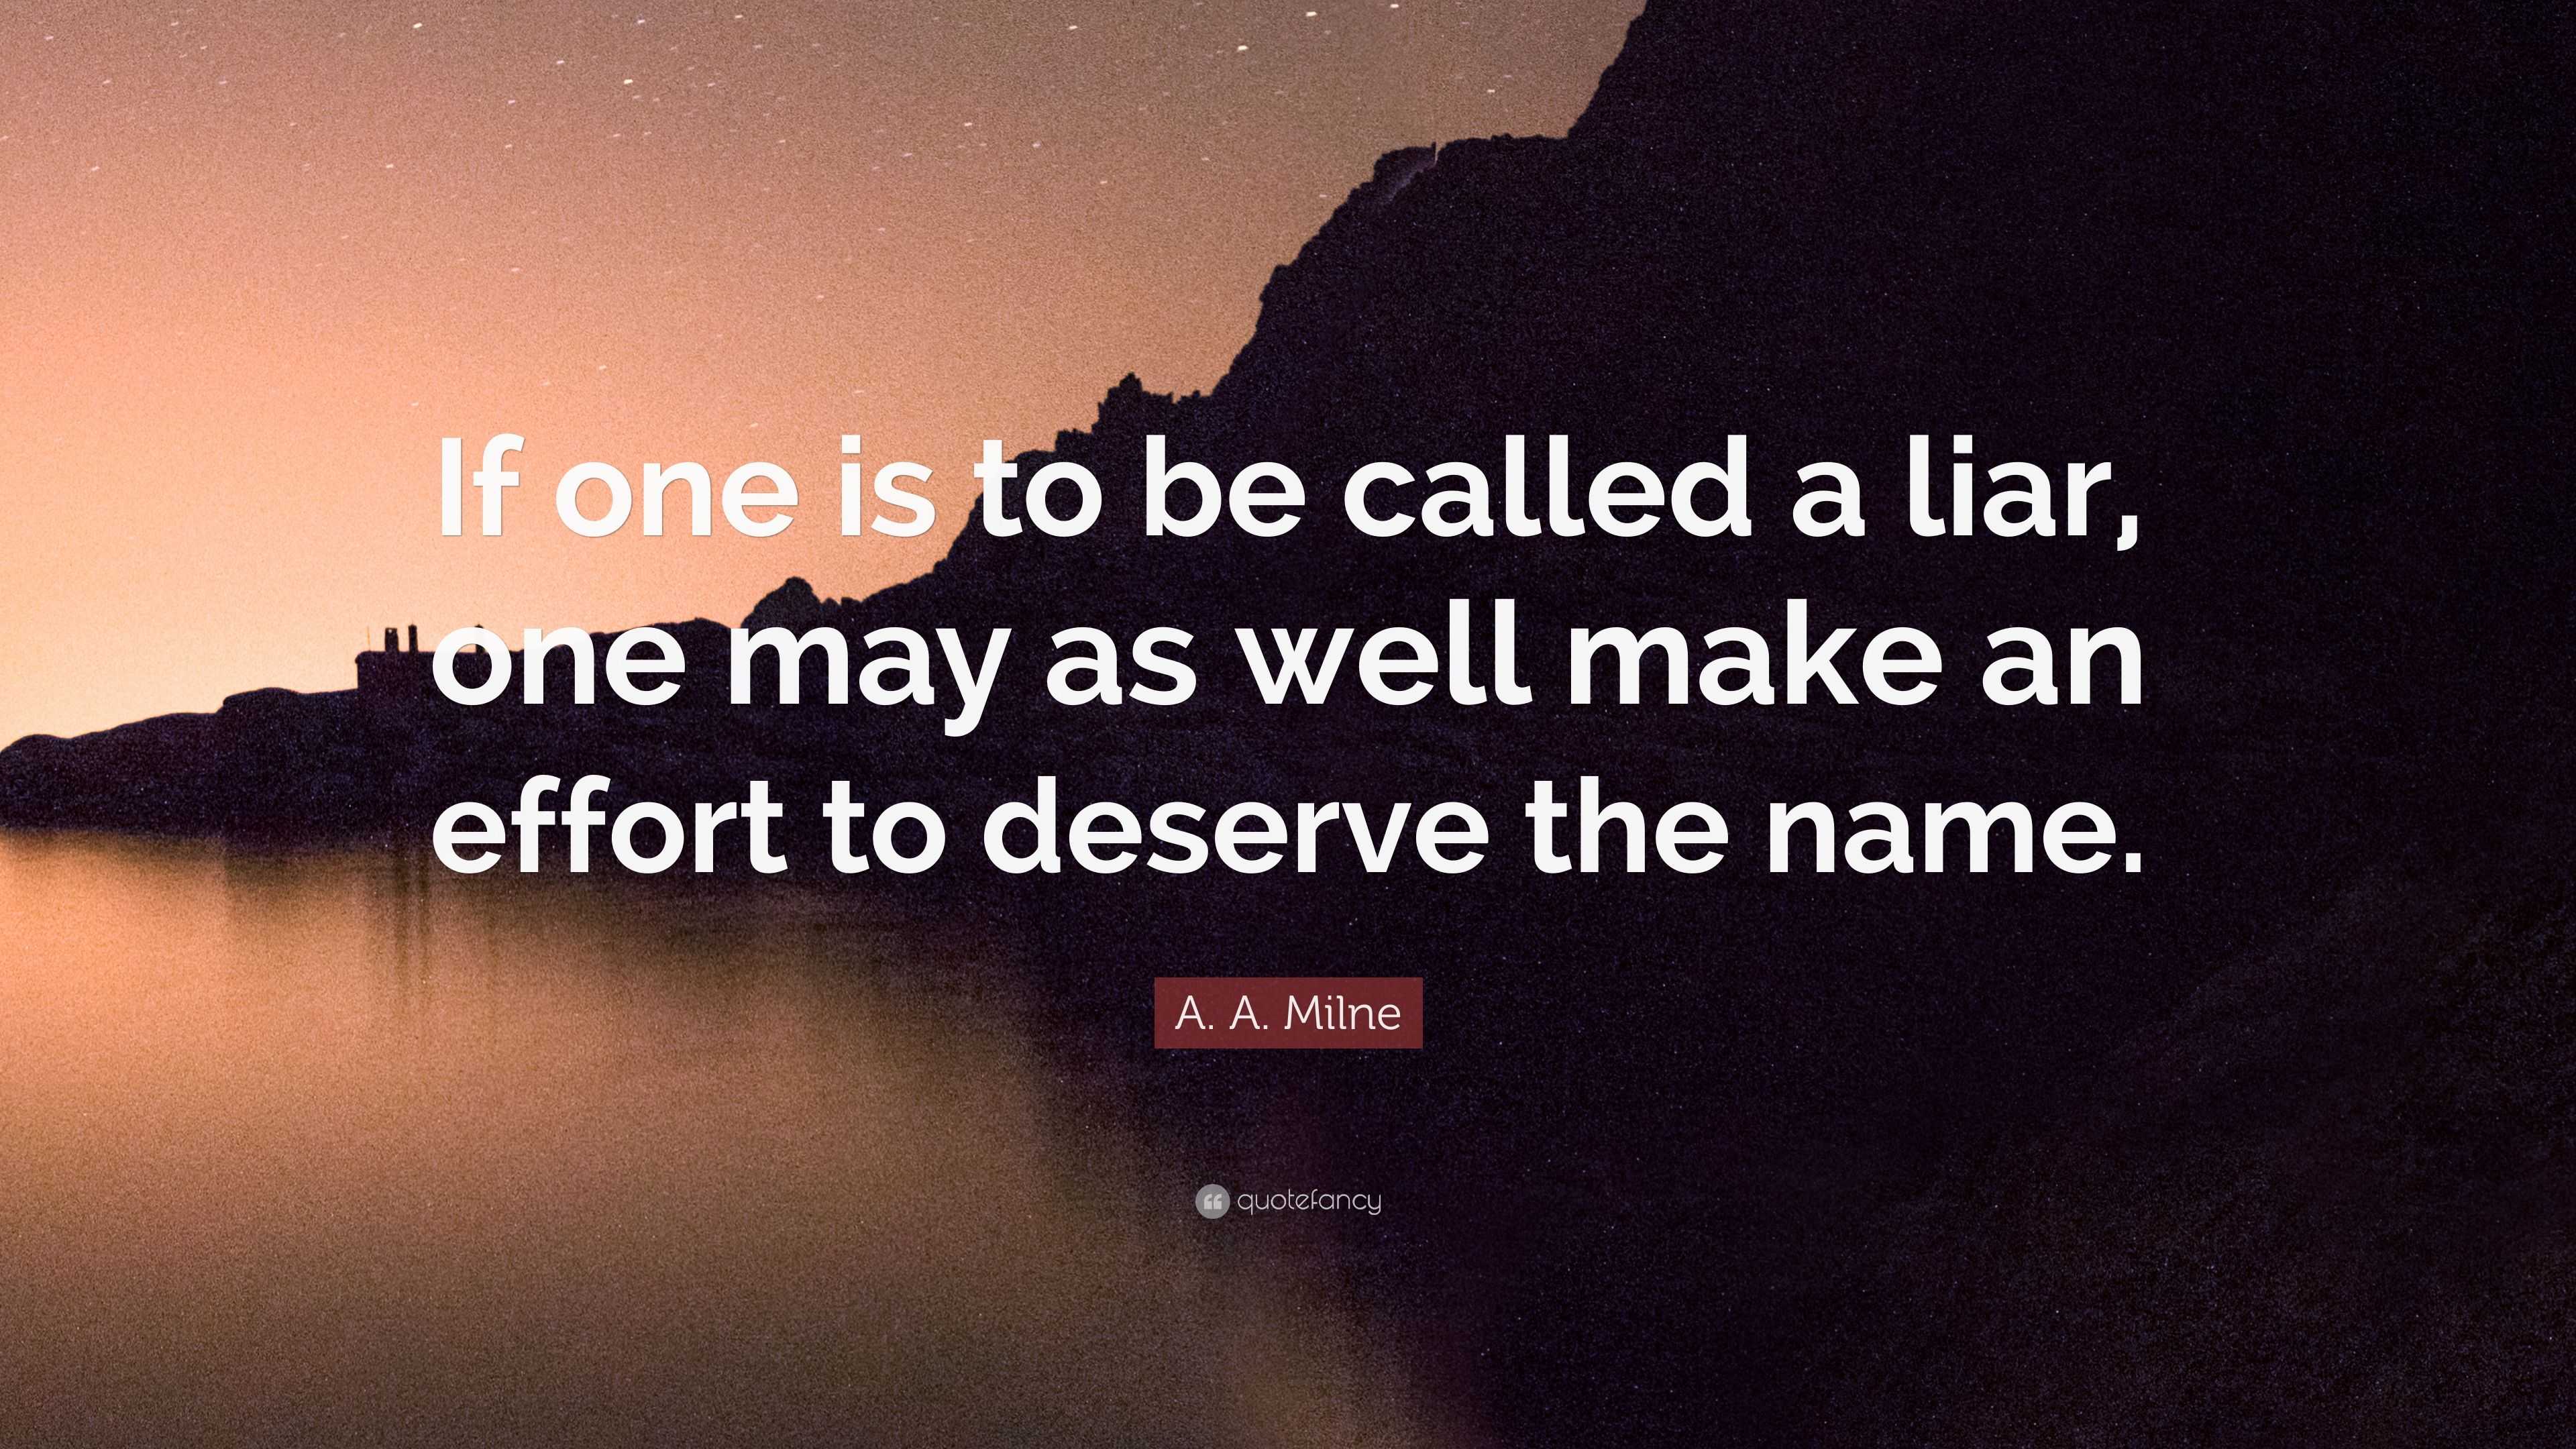 A. A. Milne Quote: “If one is to be called a liar, one may as well make